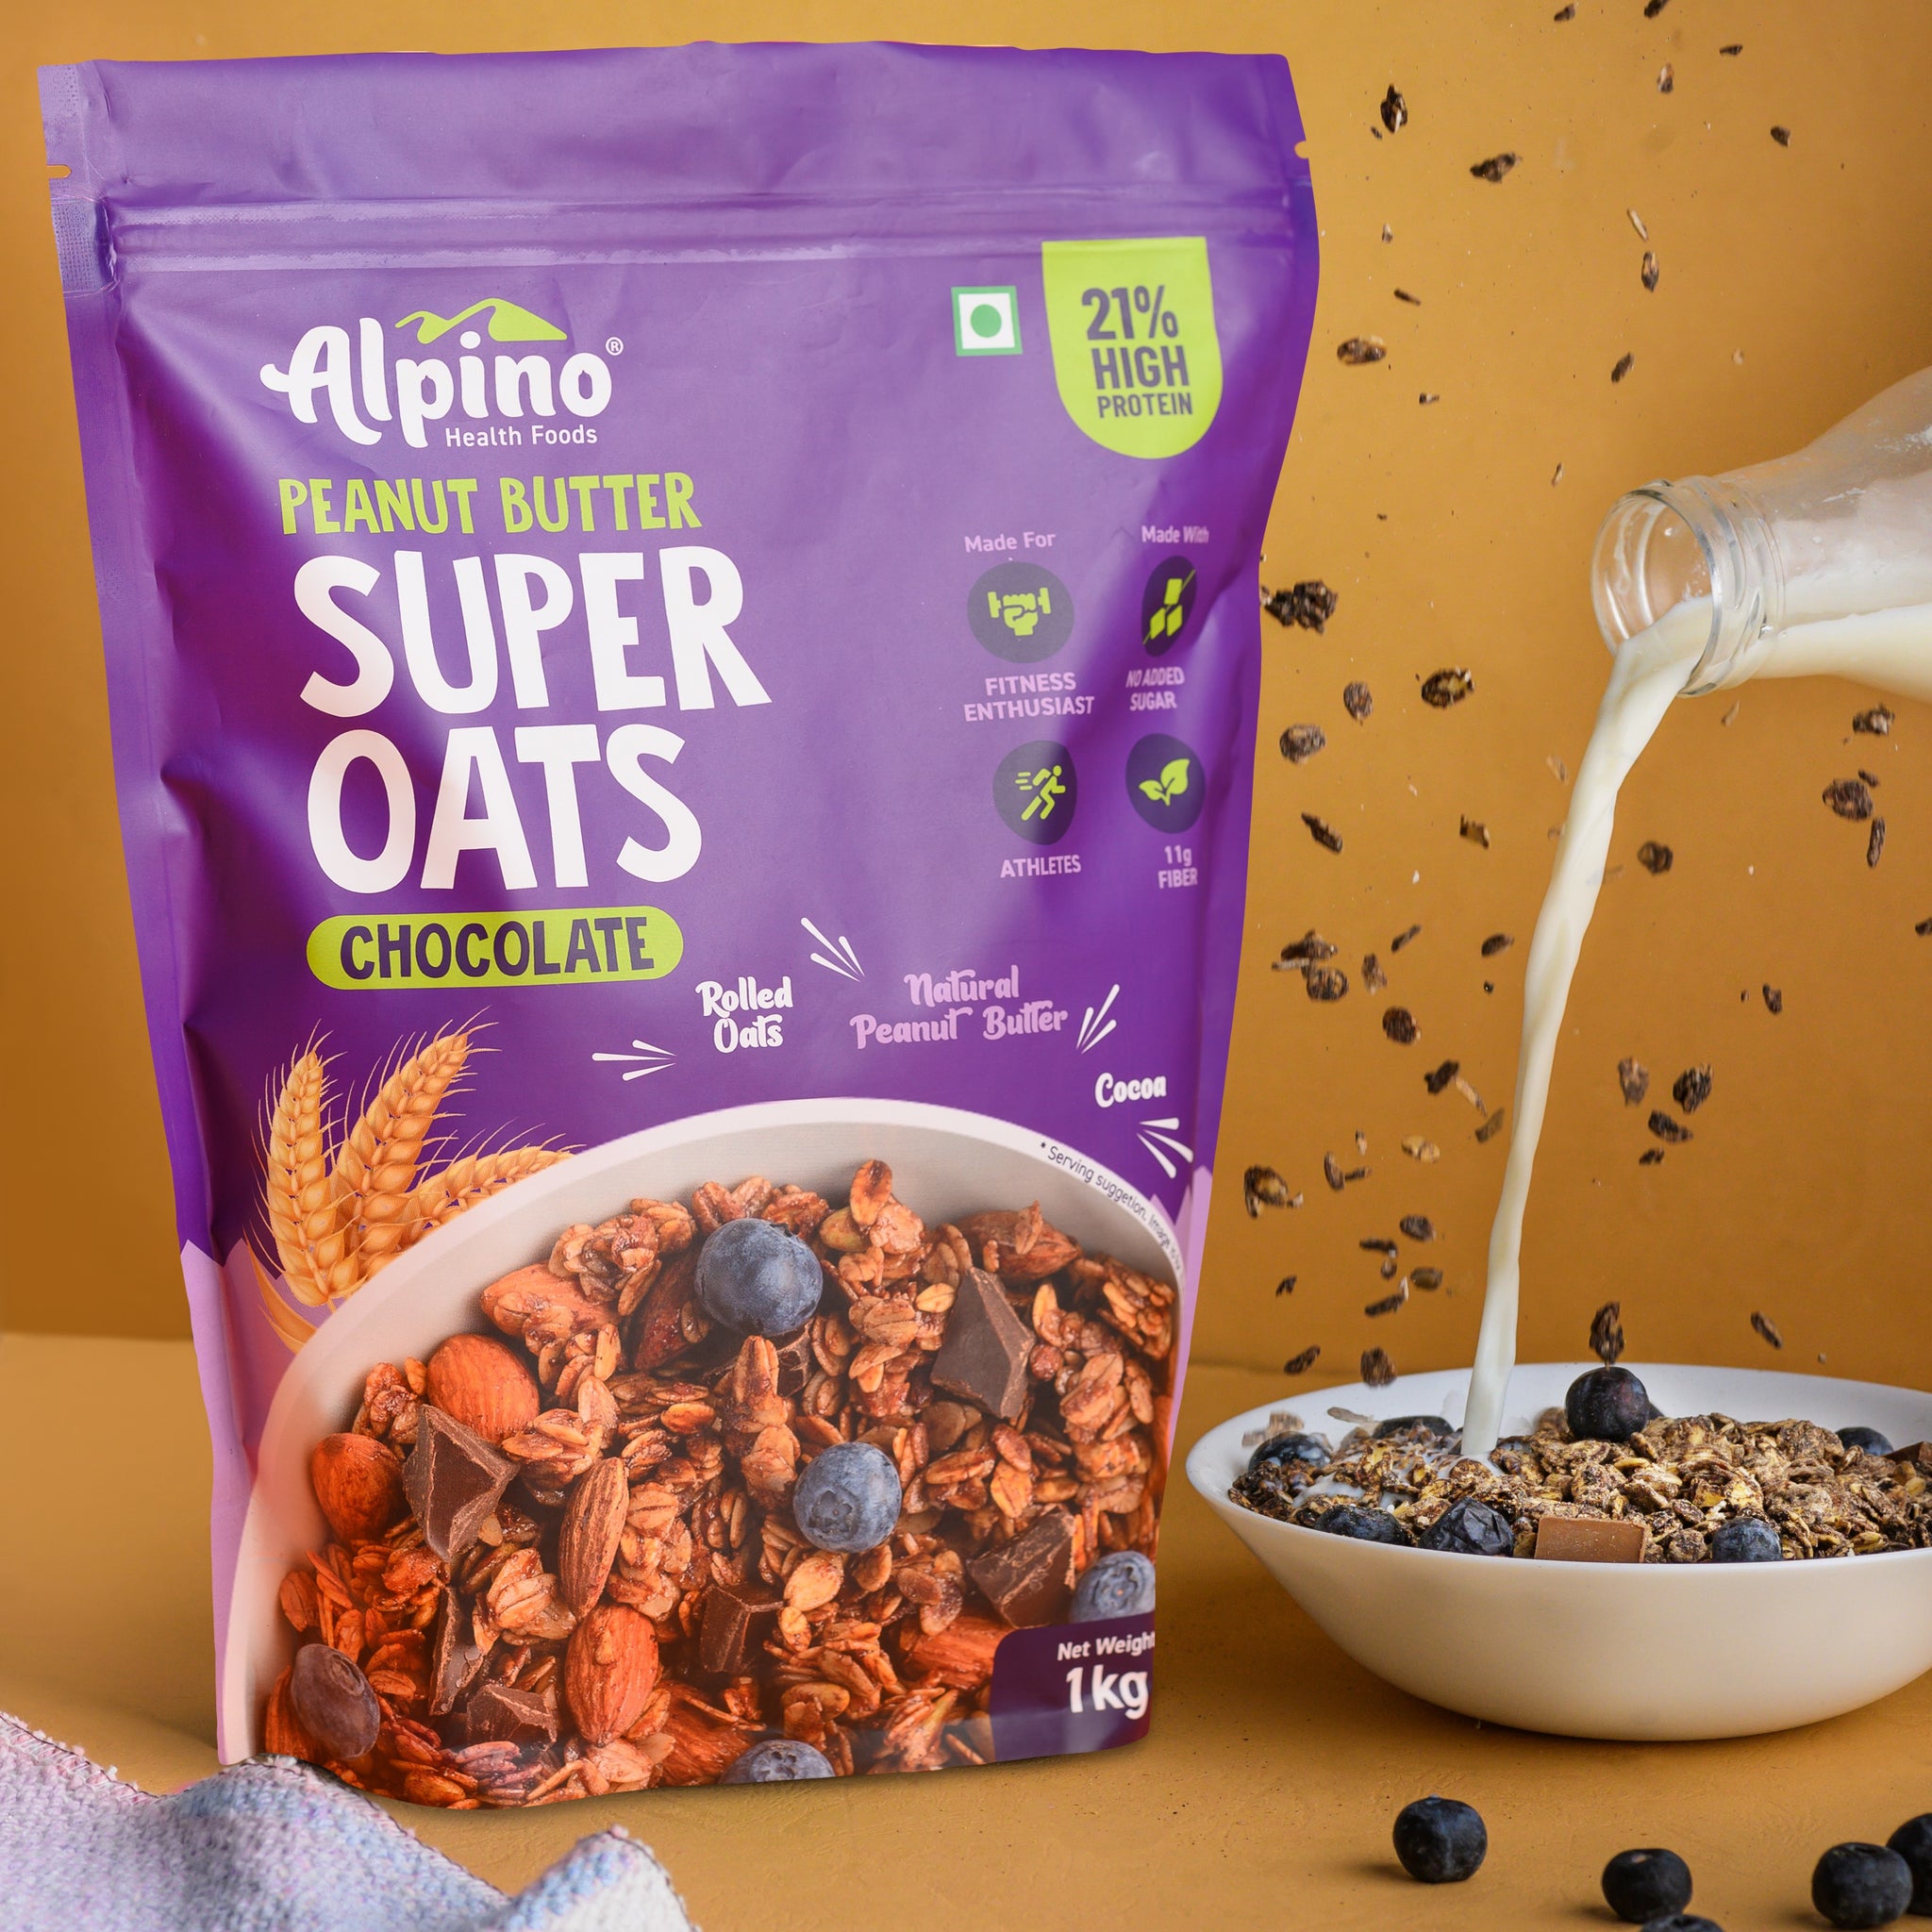 The Health Benefits of Natural Peanut Butter and Rolled Oats in ALPINO PEANUT BUTTER SUPER OATS